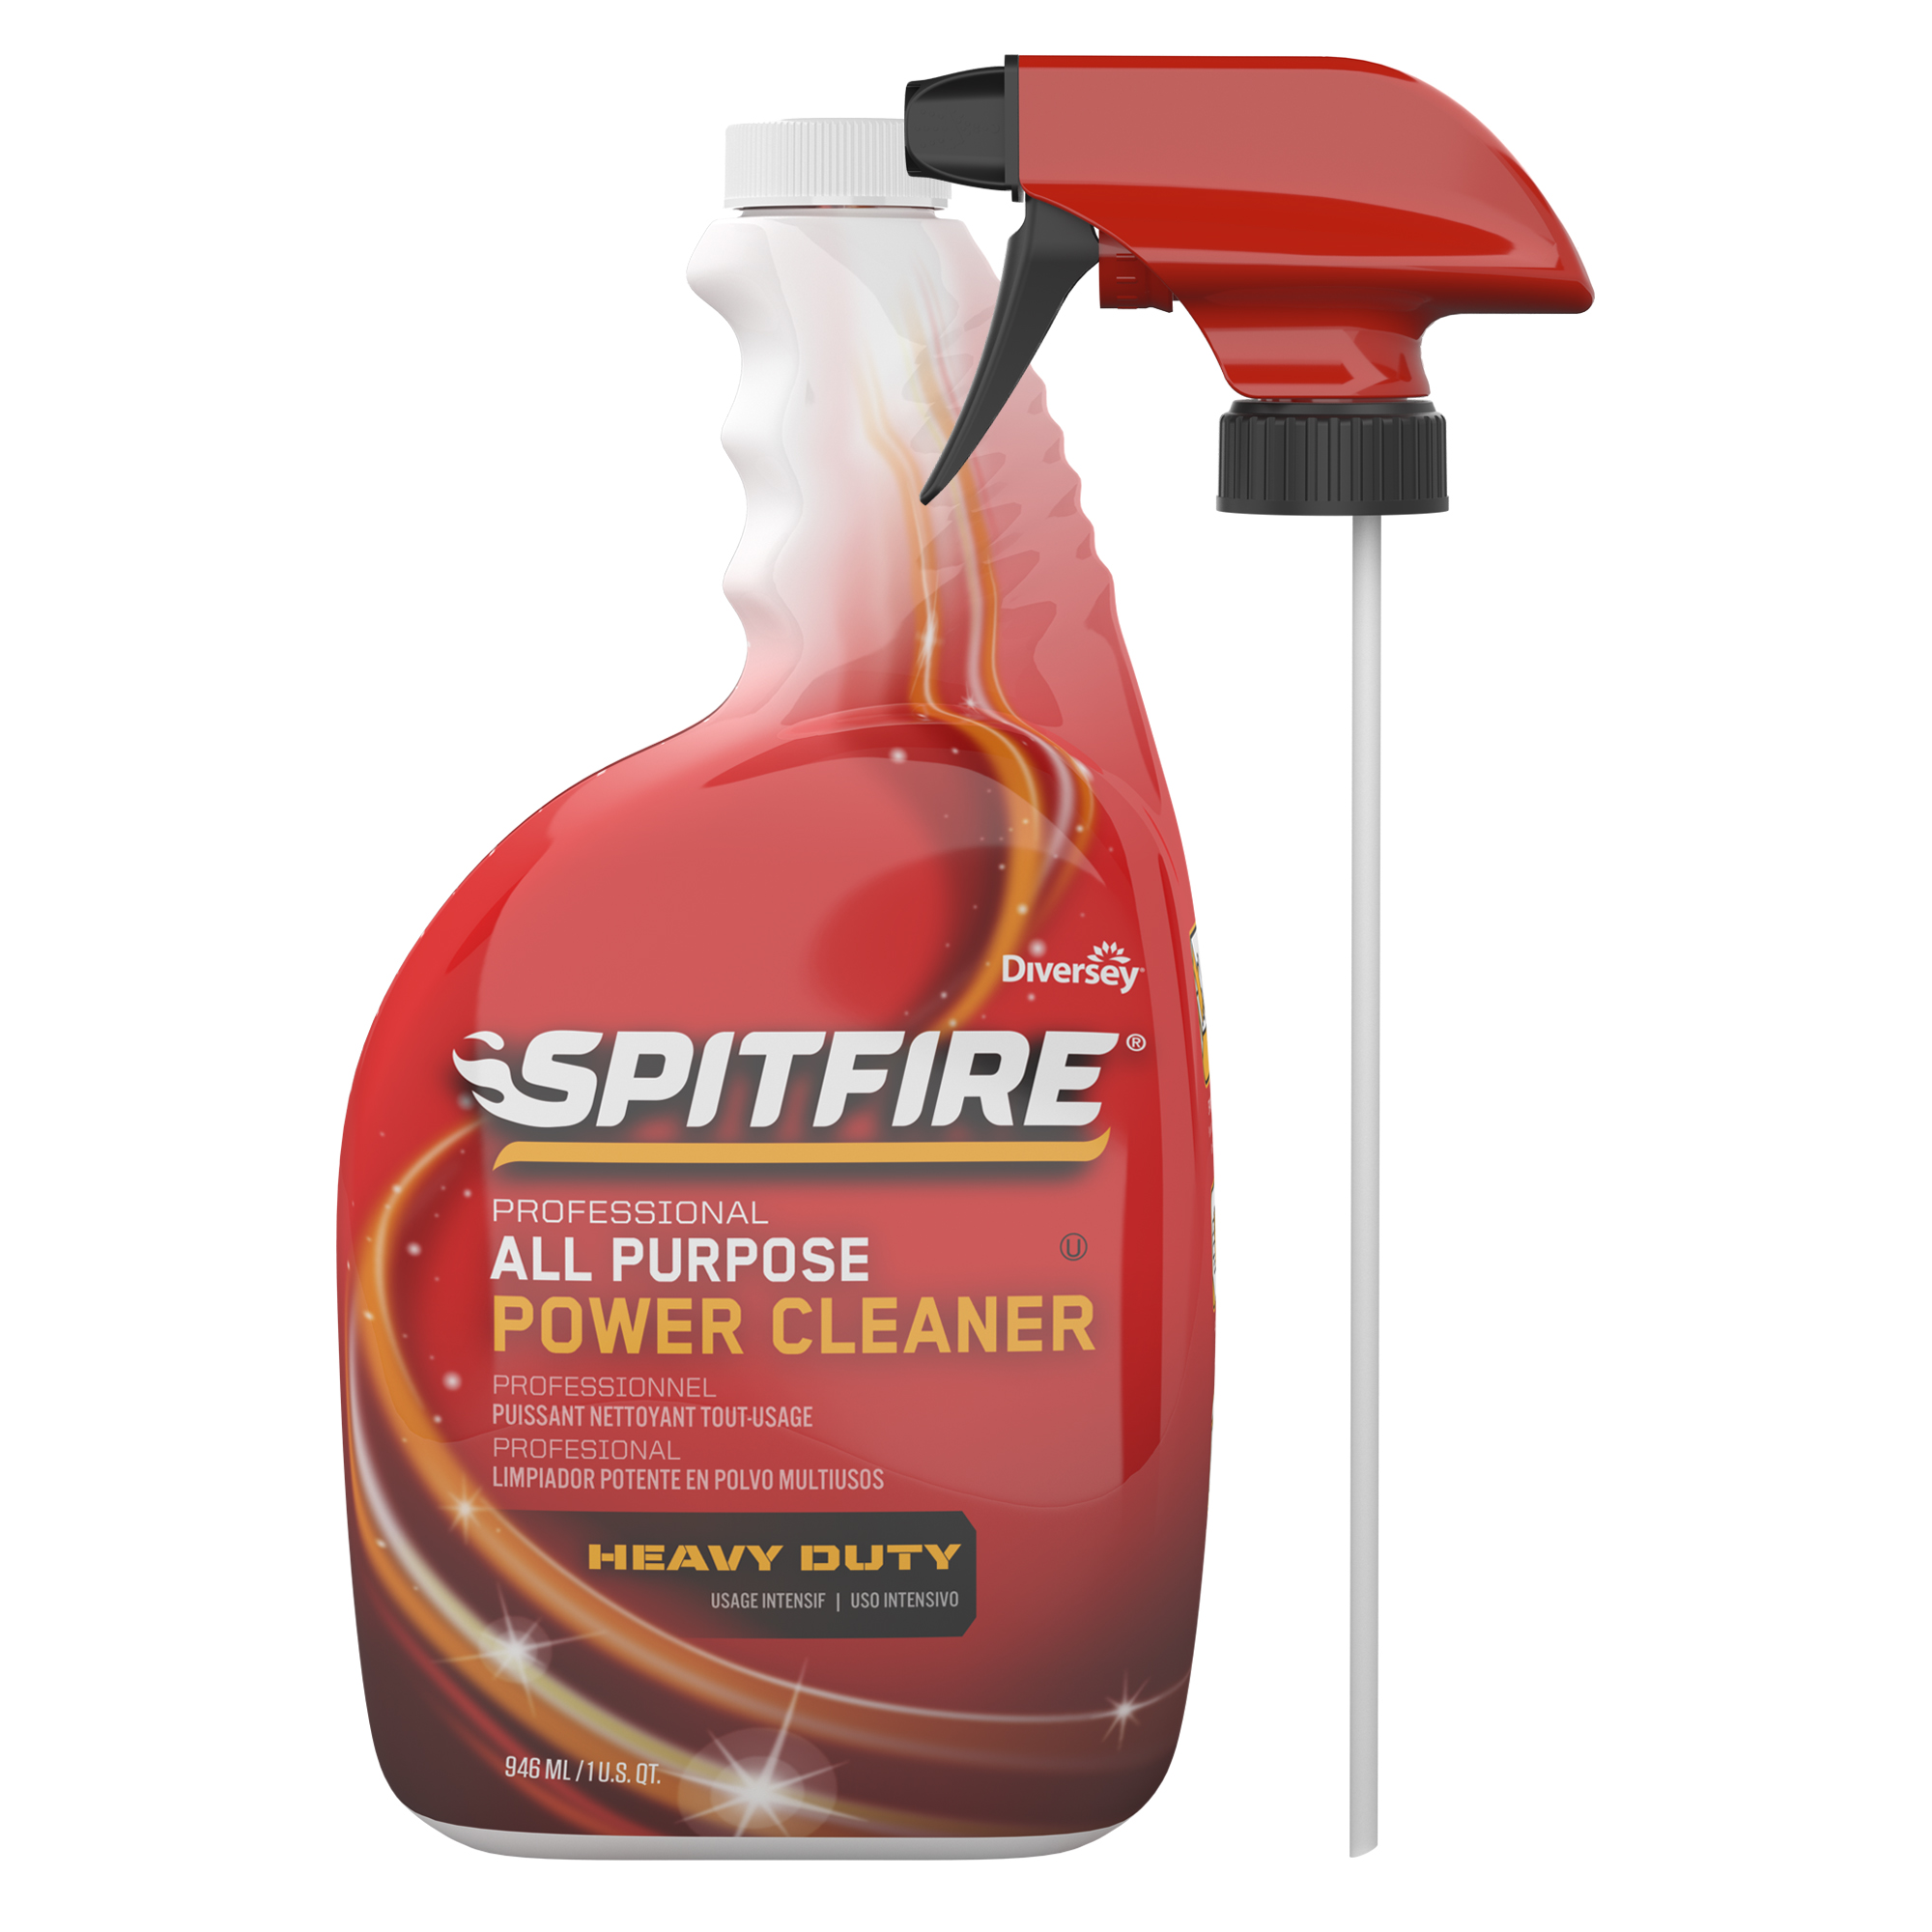 CBD540038-1_Spitfire_Professional_All_Purpose_Power_Cleaner_1x32oz_Front